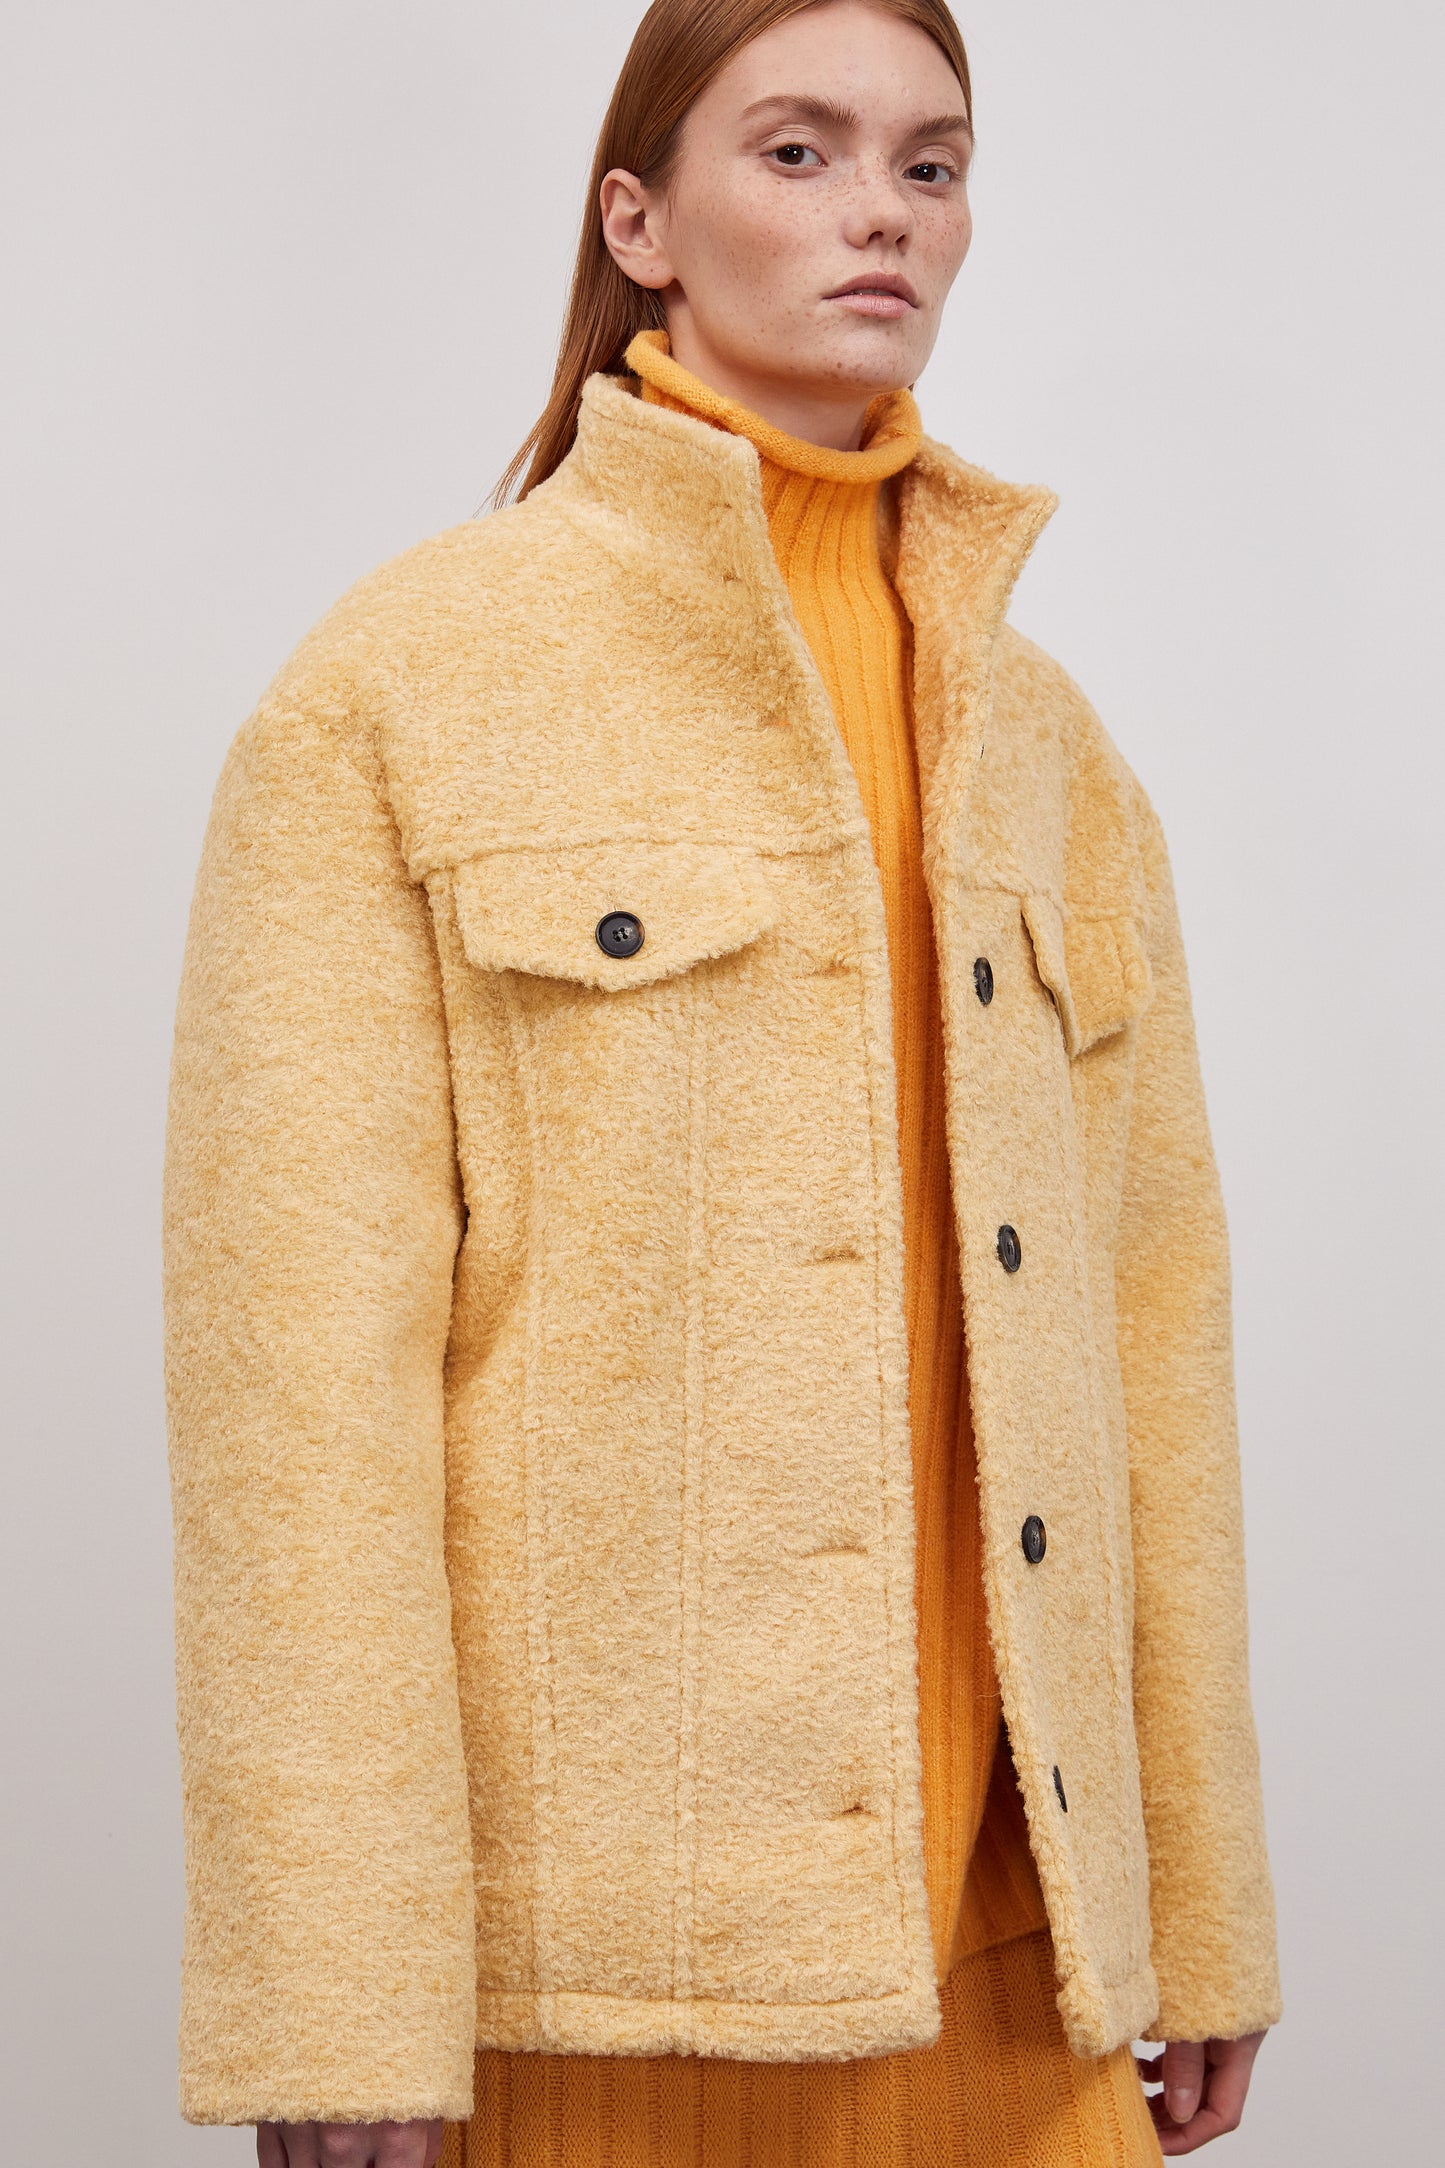 Textured Boucle Shearling Jacket, Butter